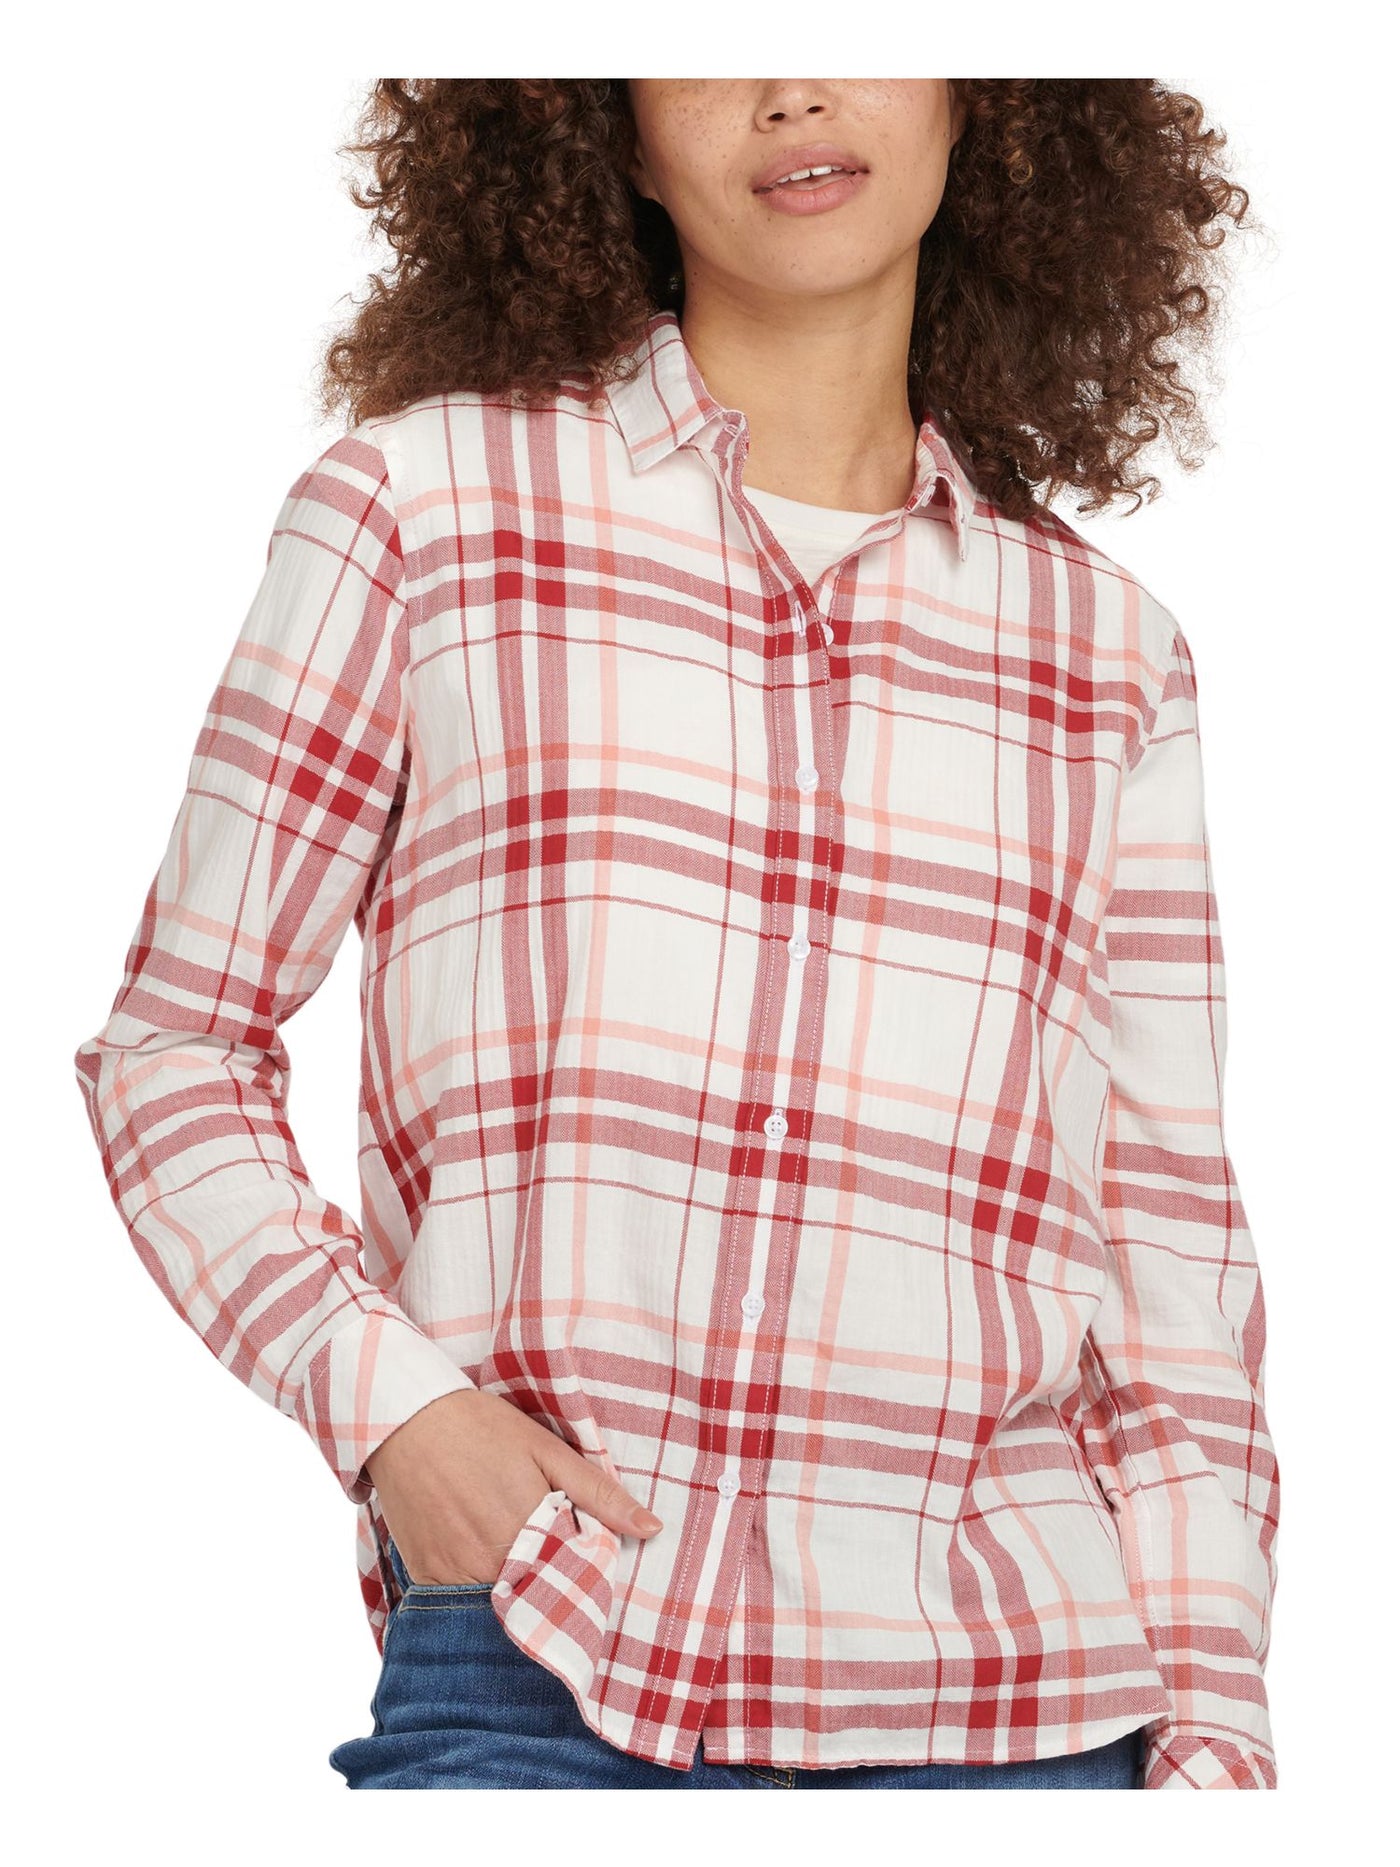 BARBOUR Womens Red Plaid Cuffed Sleeve Collared Button Up Top 6